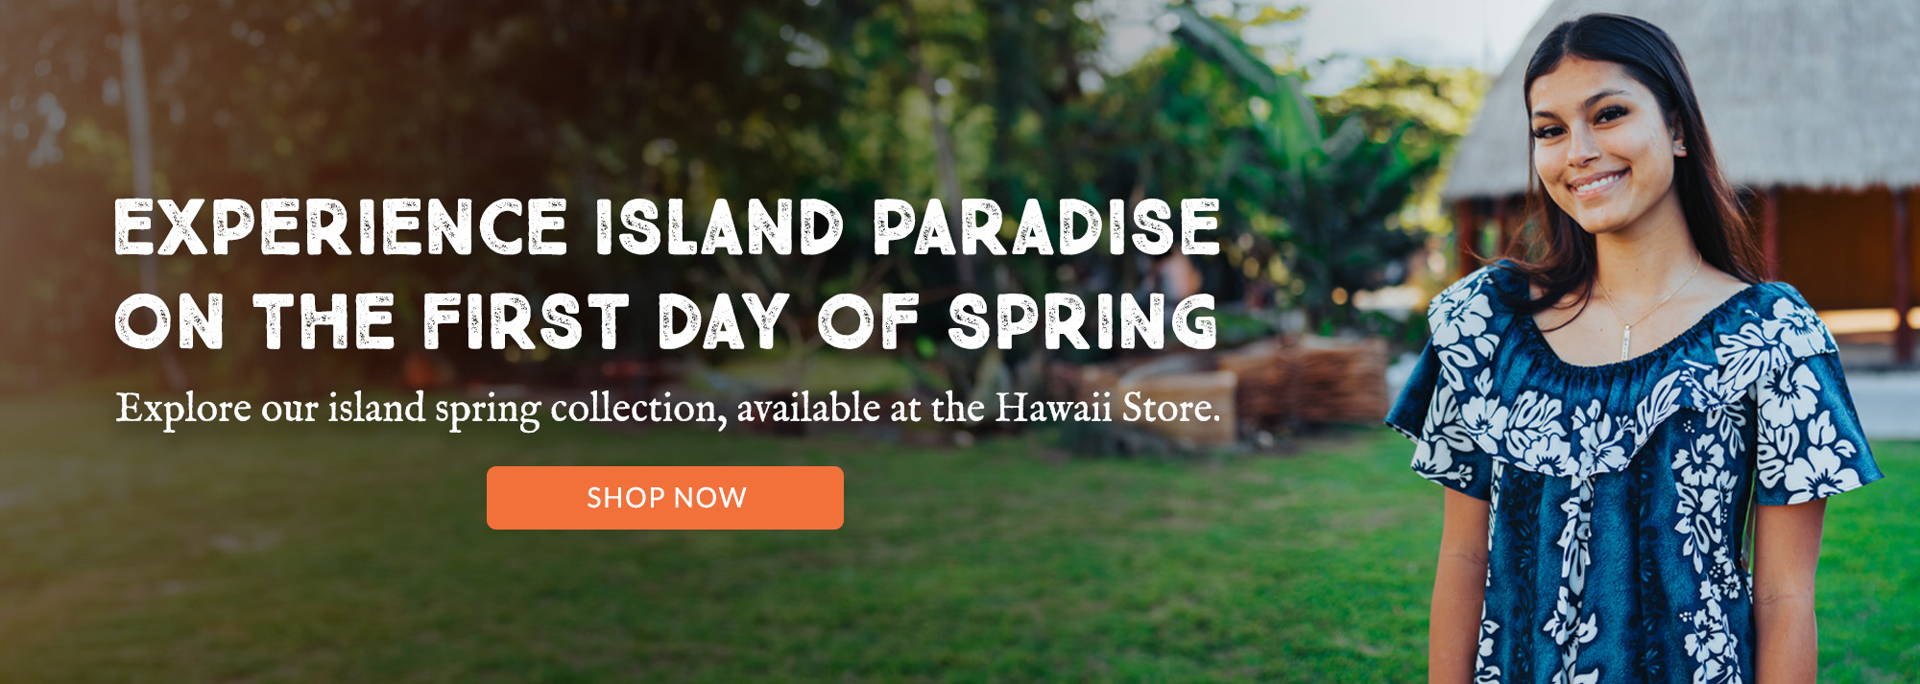 Experience island paradise on the first day of spring! Explore our island spring collection, available at the Hawaii Store.